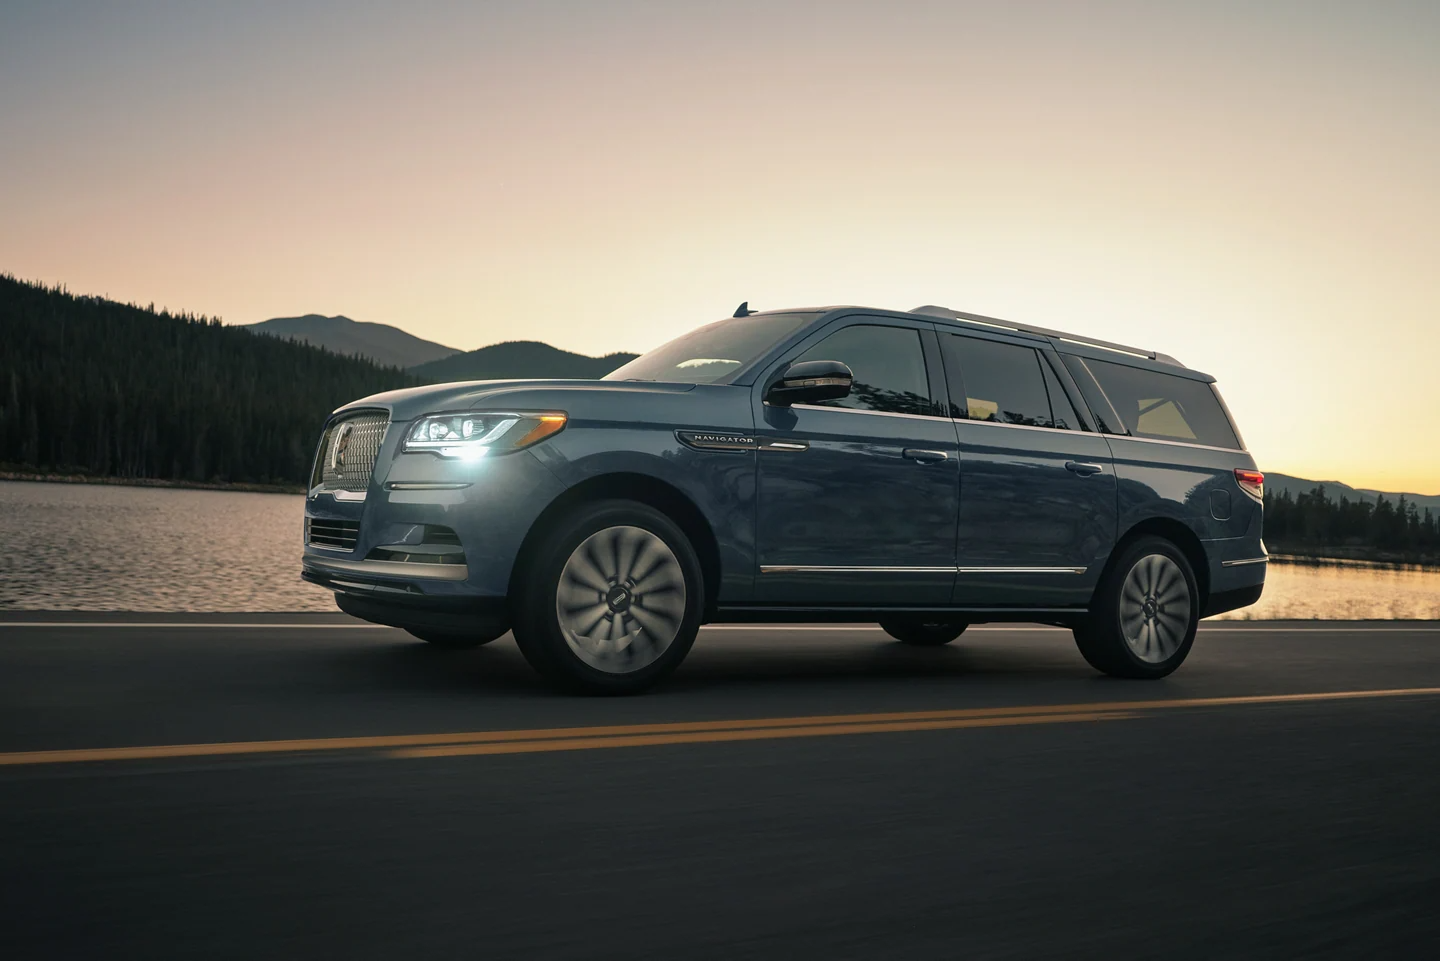 Trim Levels of the 2023 Lincoln Navigator near Seattle